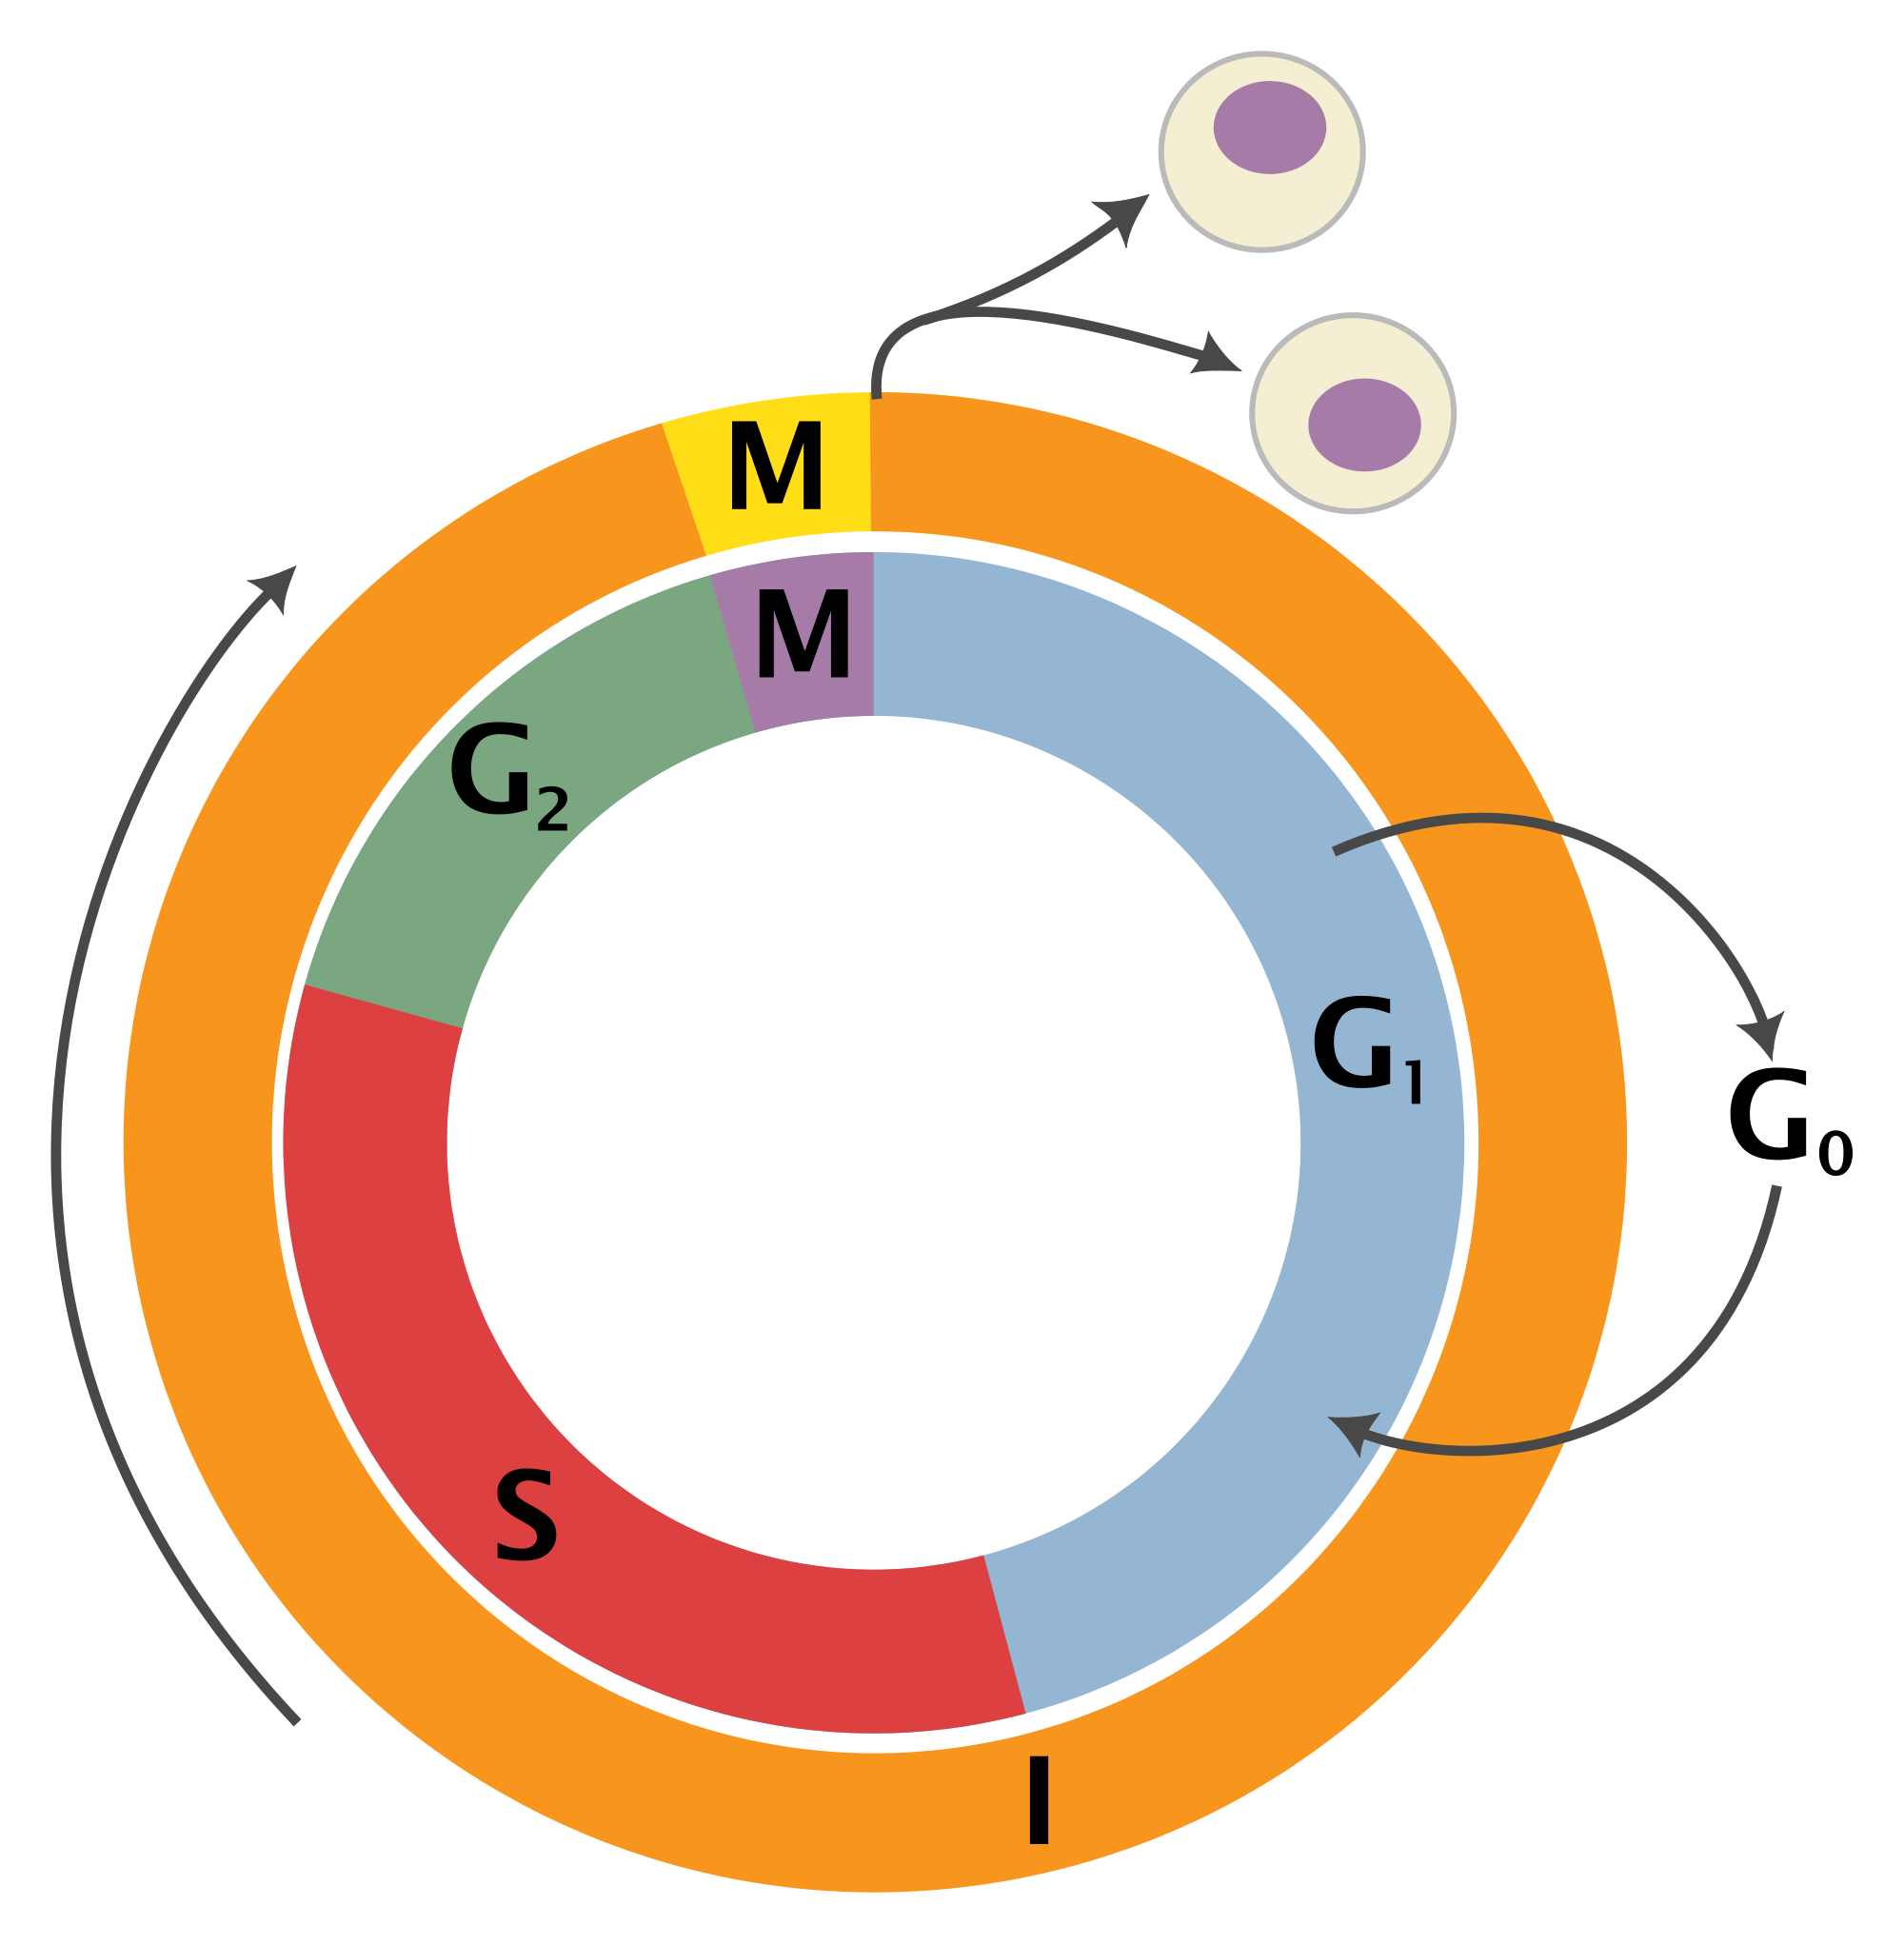 File cell svg wikimedia. Cycle clipart circular